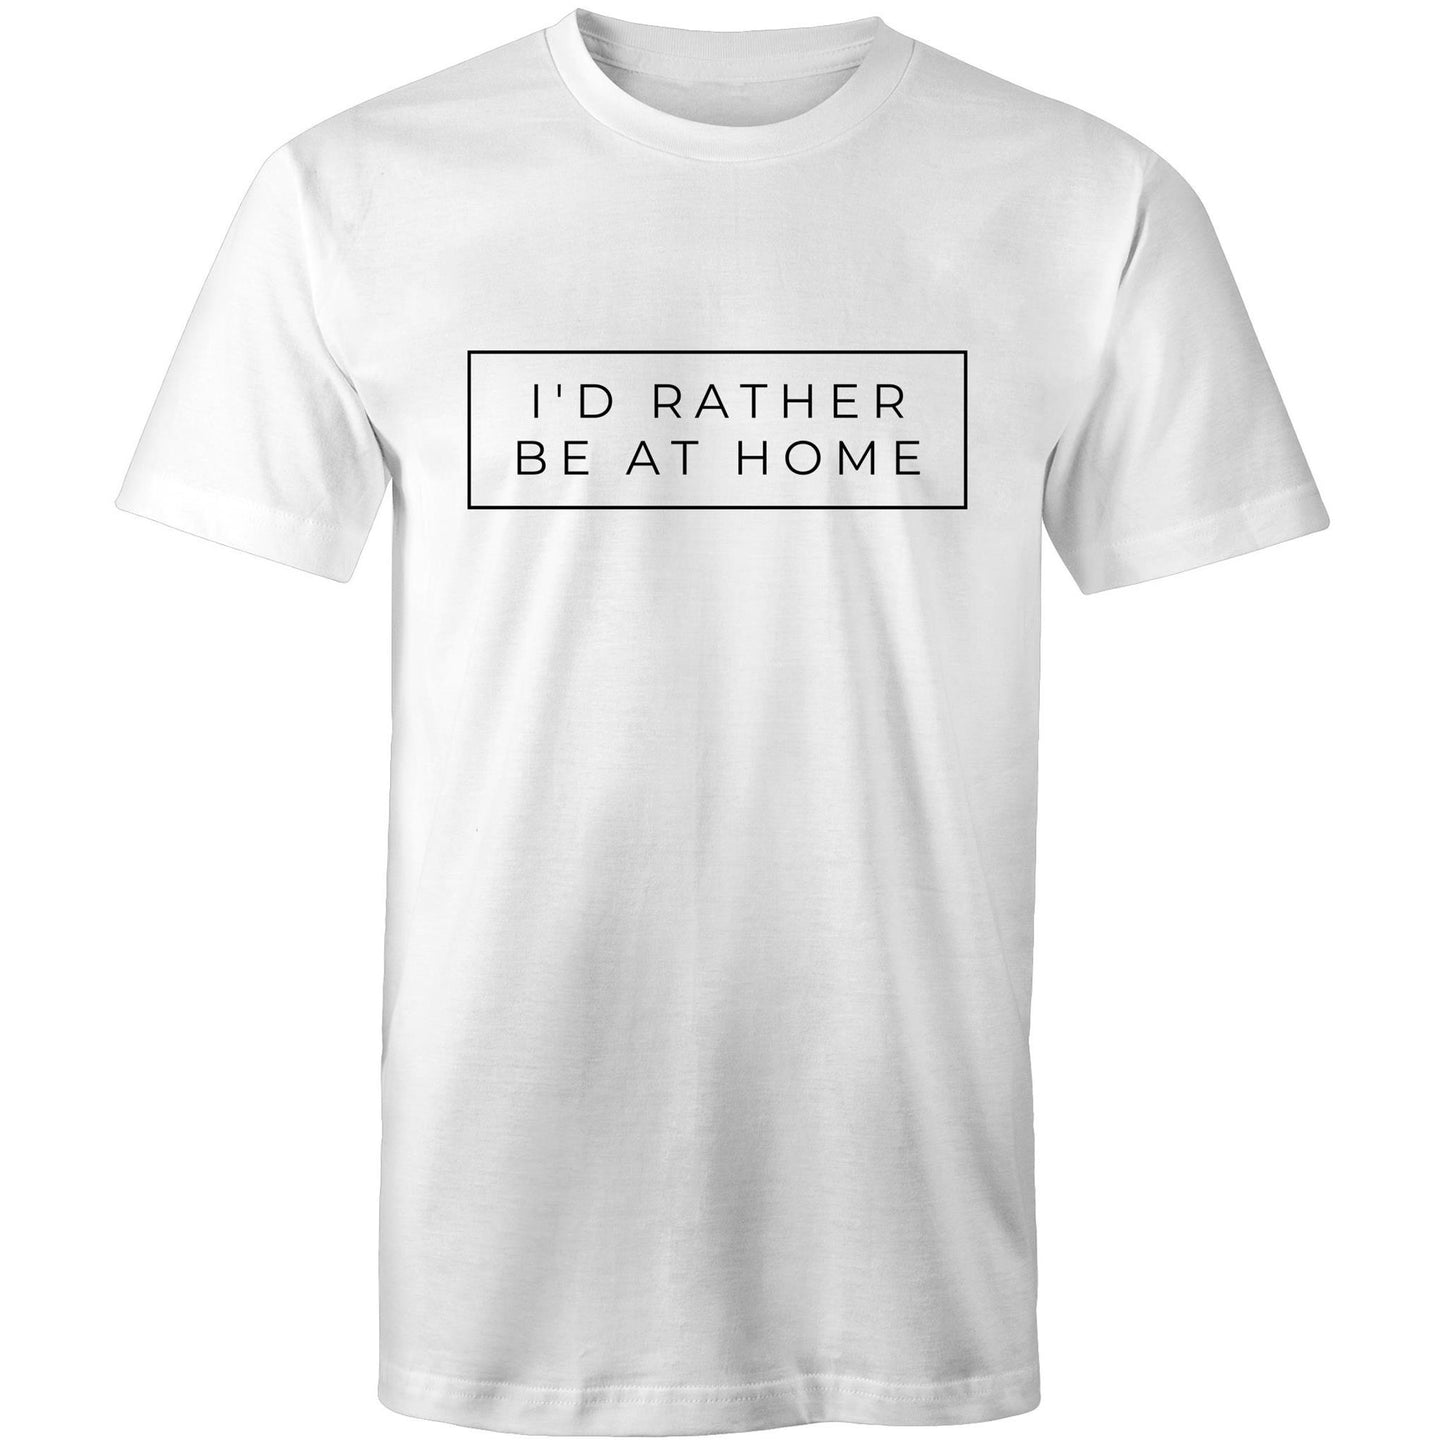 I'd Rather Be At Home - Mens T-Shirt White Mens T-shirt Funny